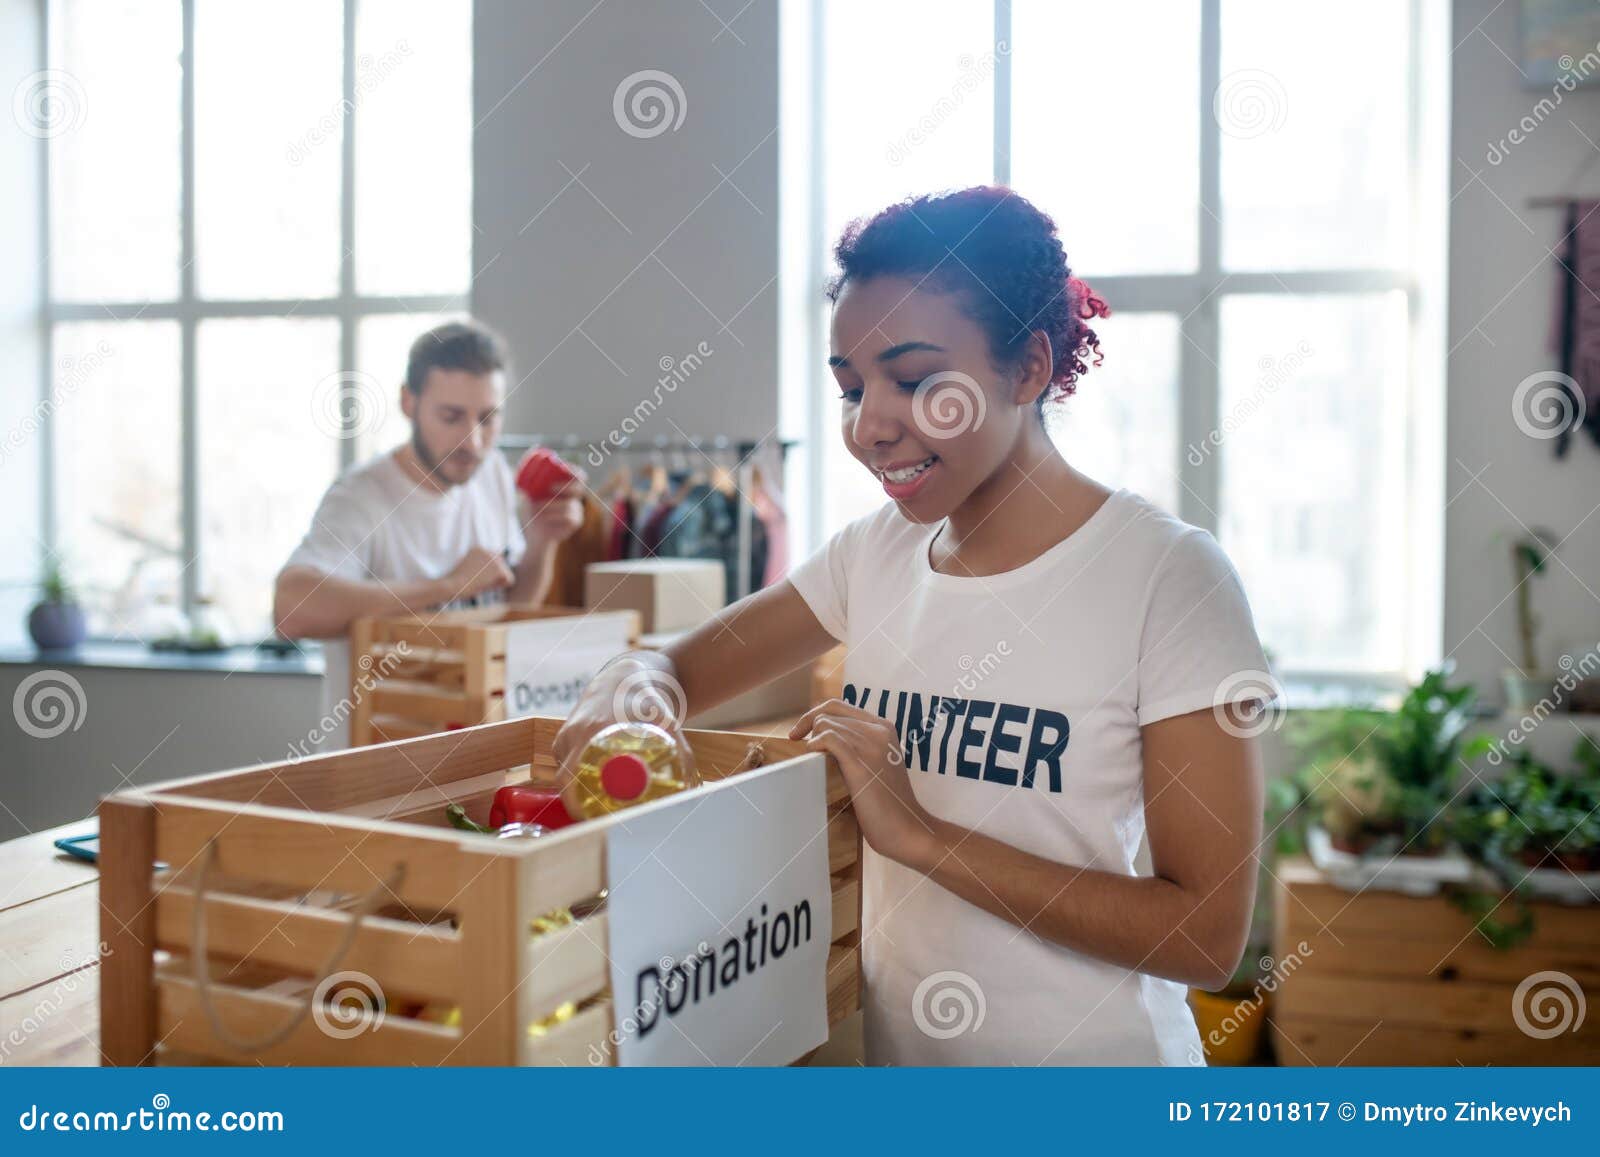 Young Girl With Colored Hair Putting Vegetable Oil In Charity Box